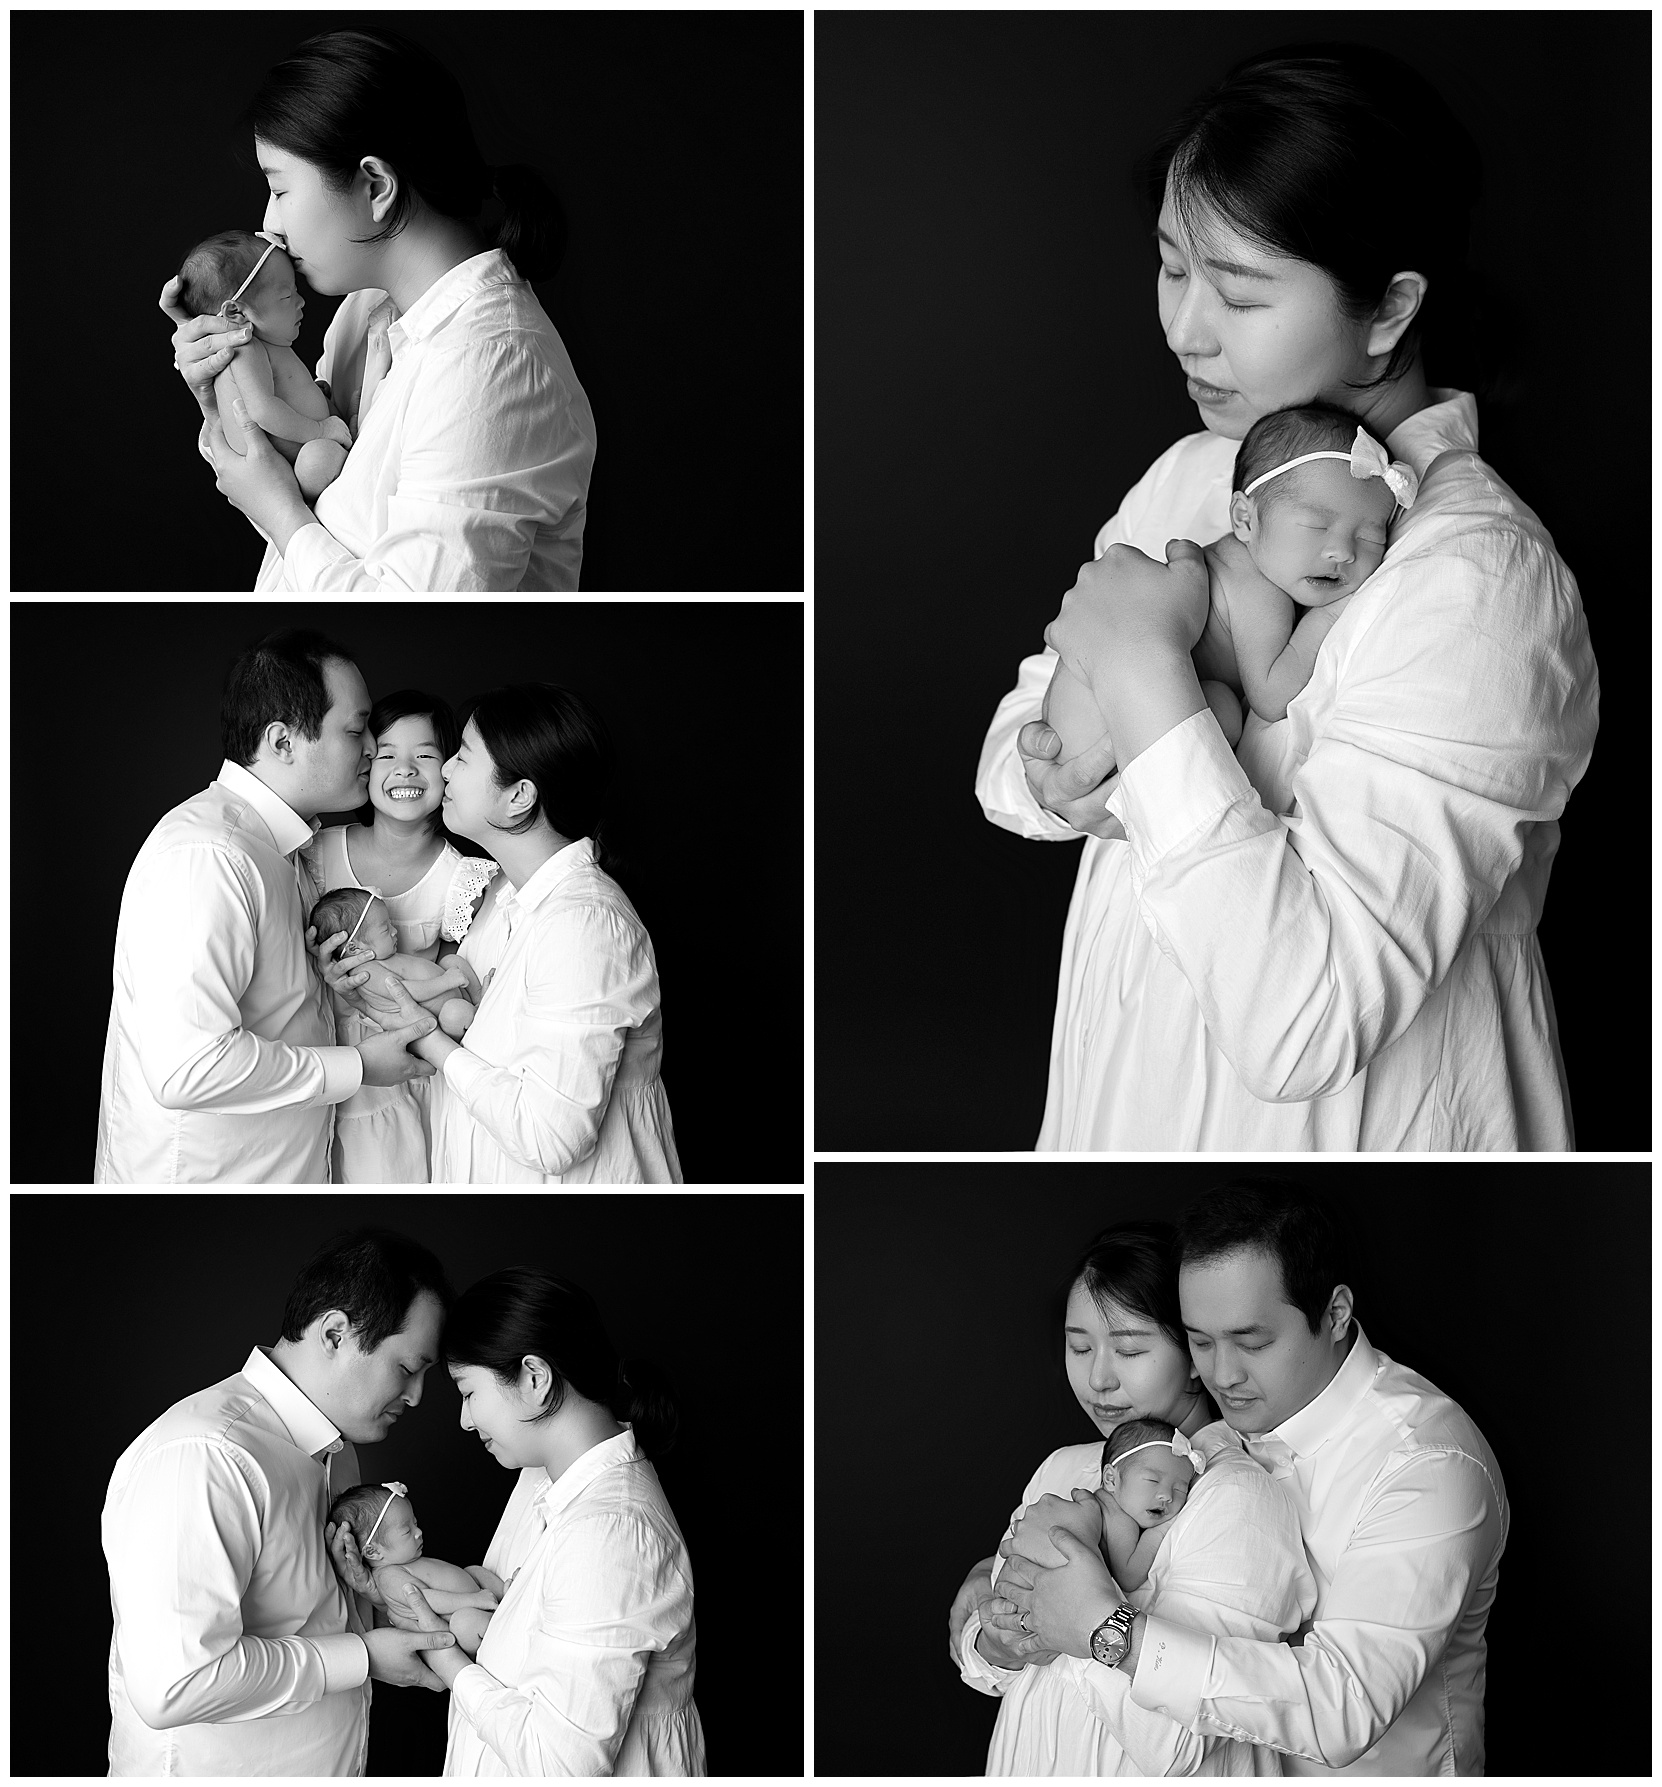 Black and white family photo montage featuring a man, woman, young child and newborn baby taken in the Hello Photography Austin family photography studio